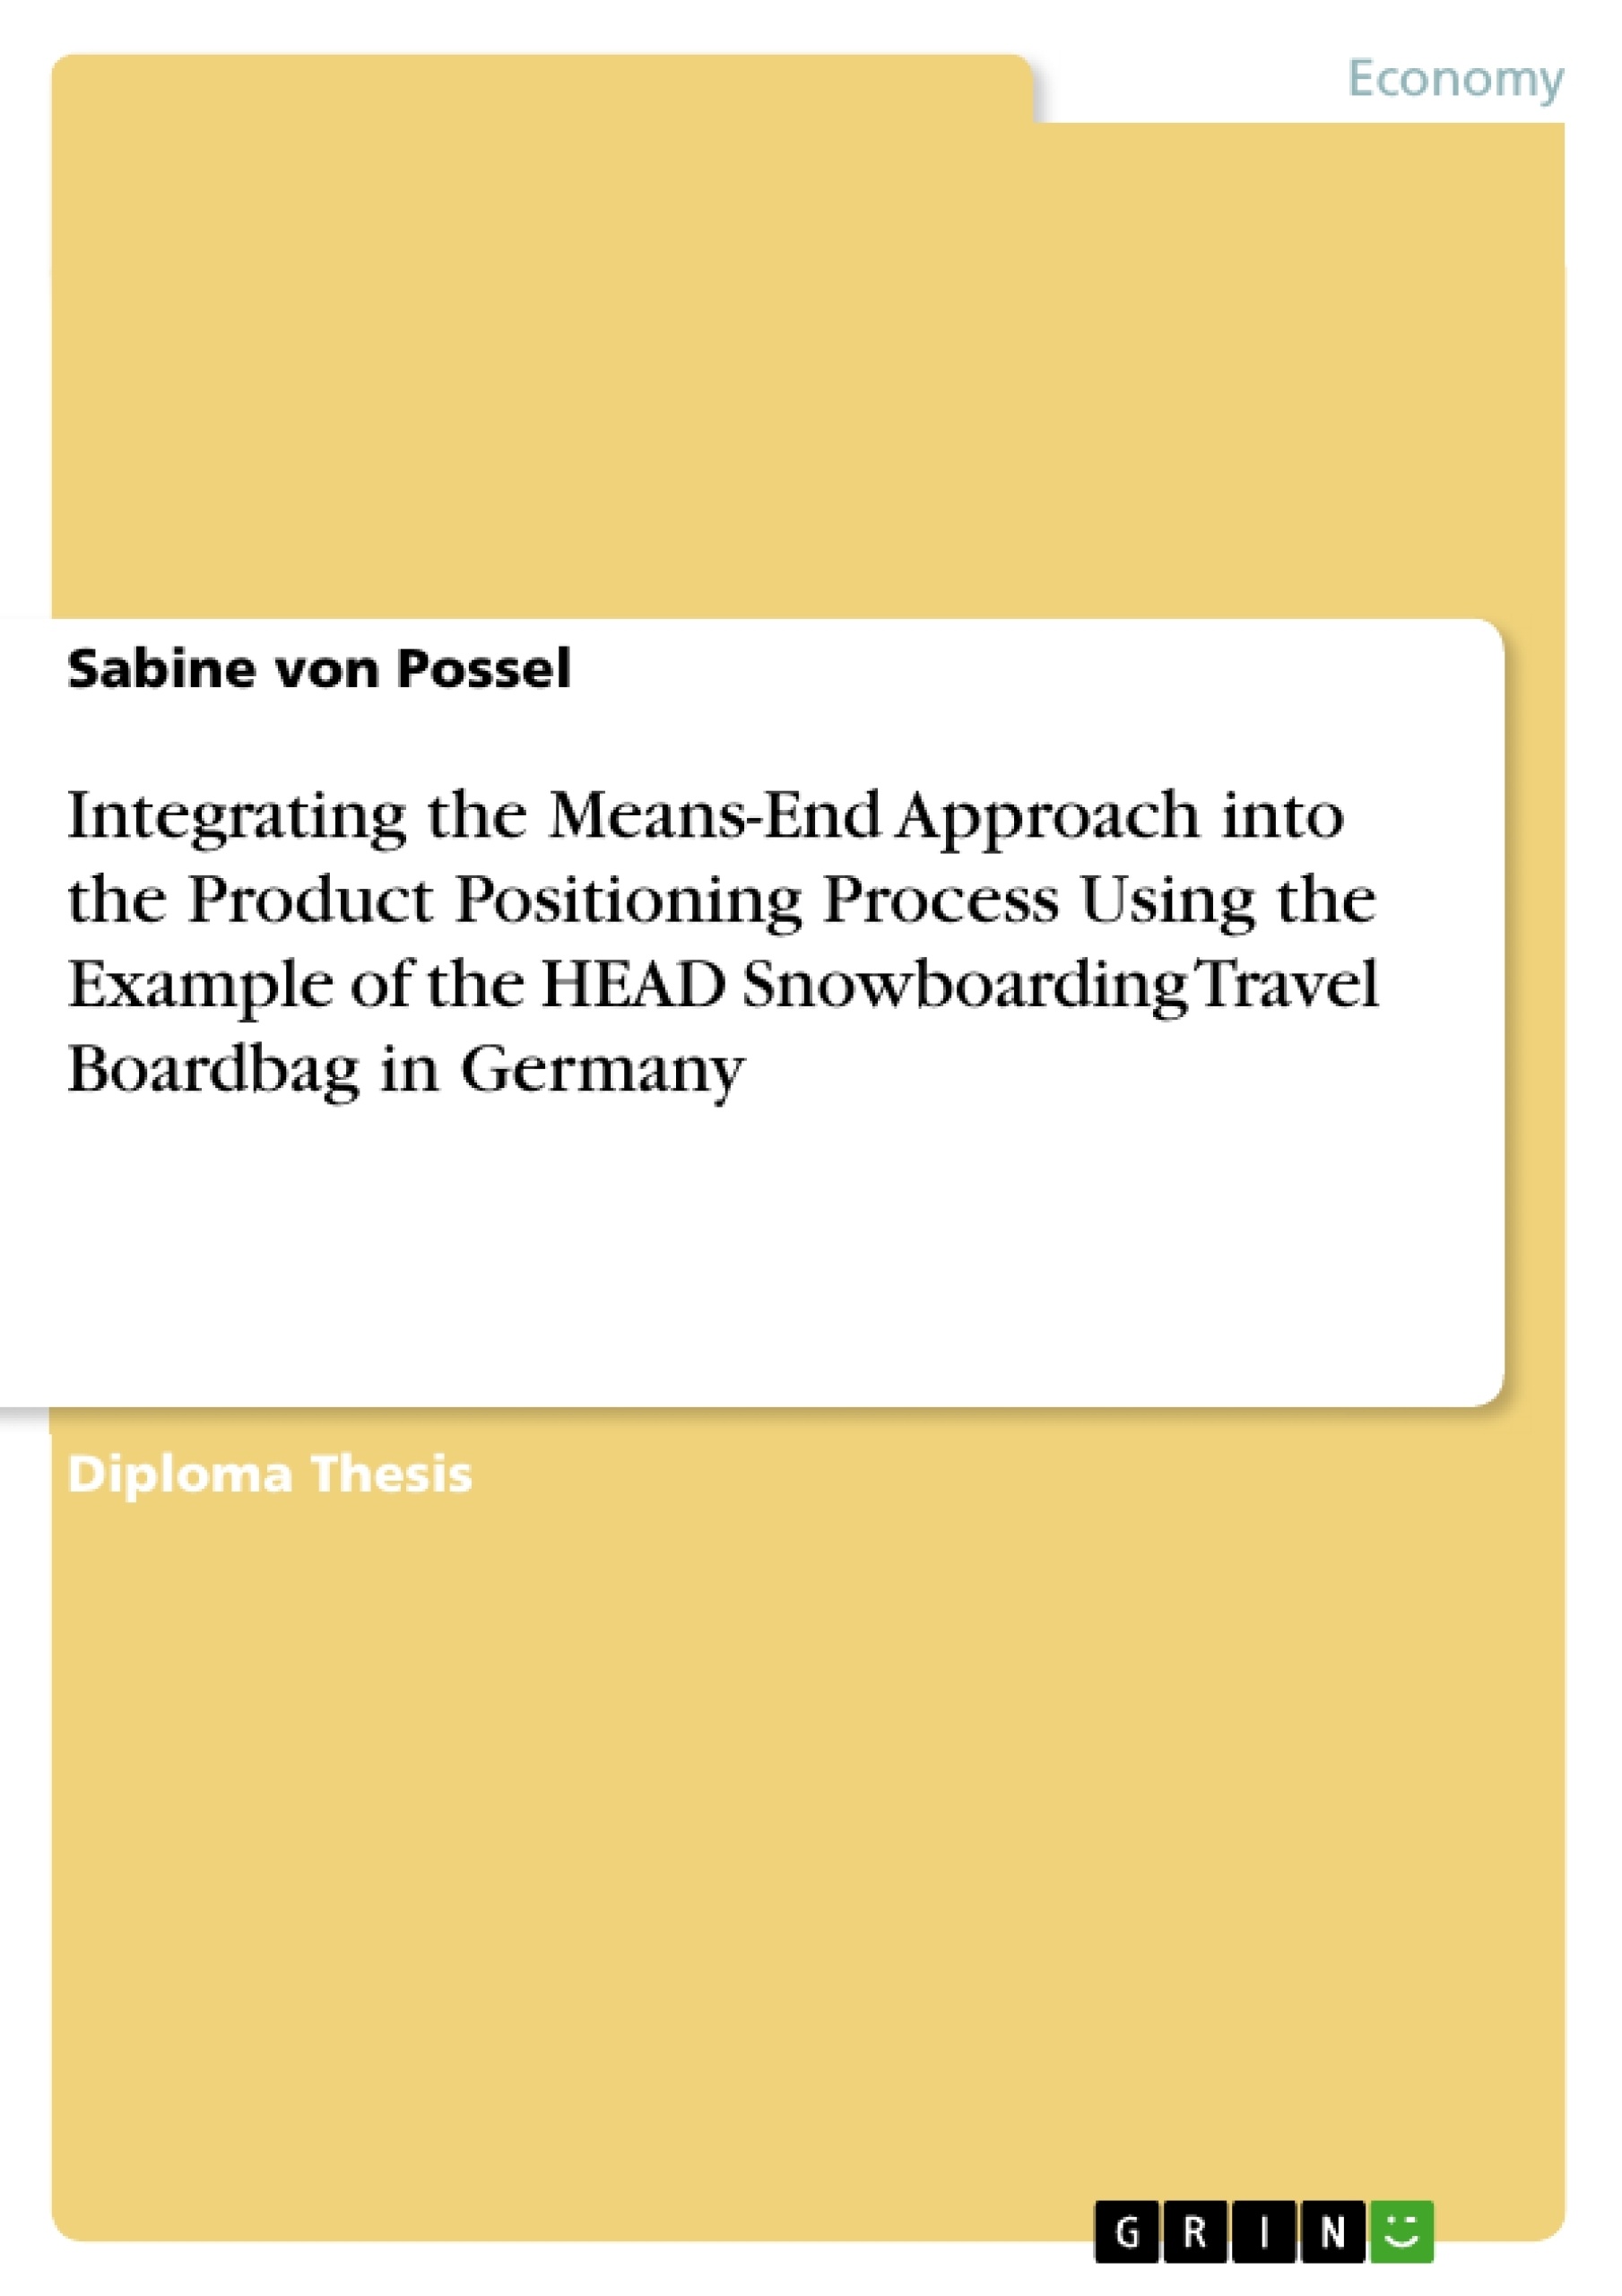 Title: Integrating the Means-End Approach into the Product Positioning Process Using the Example of the HEAD Snowboarding Travel Boardbag in Germany